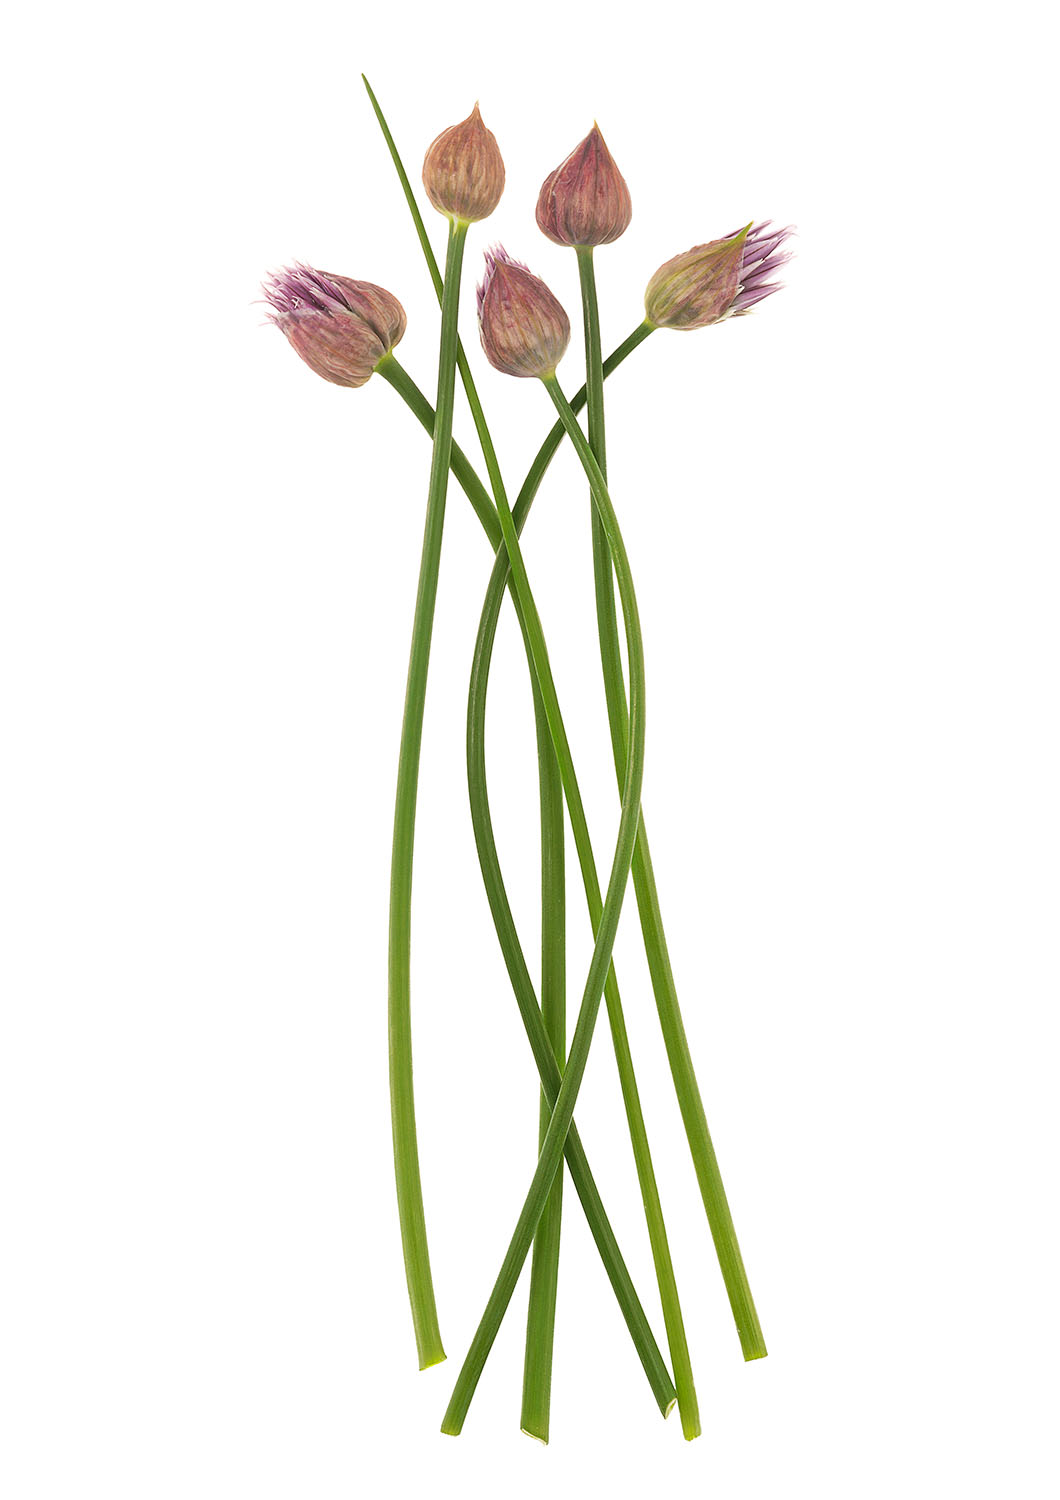 Five Chive Flowers